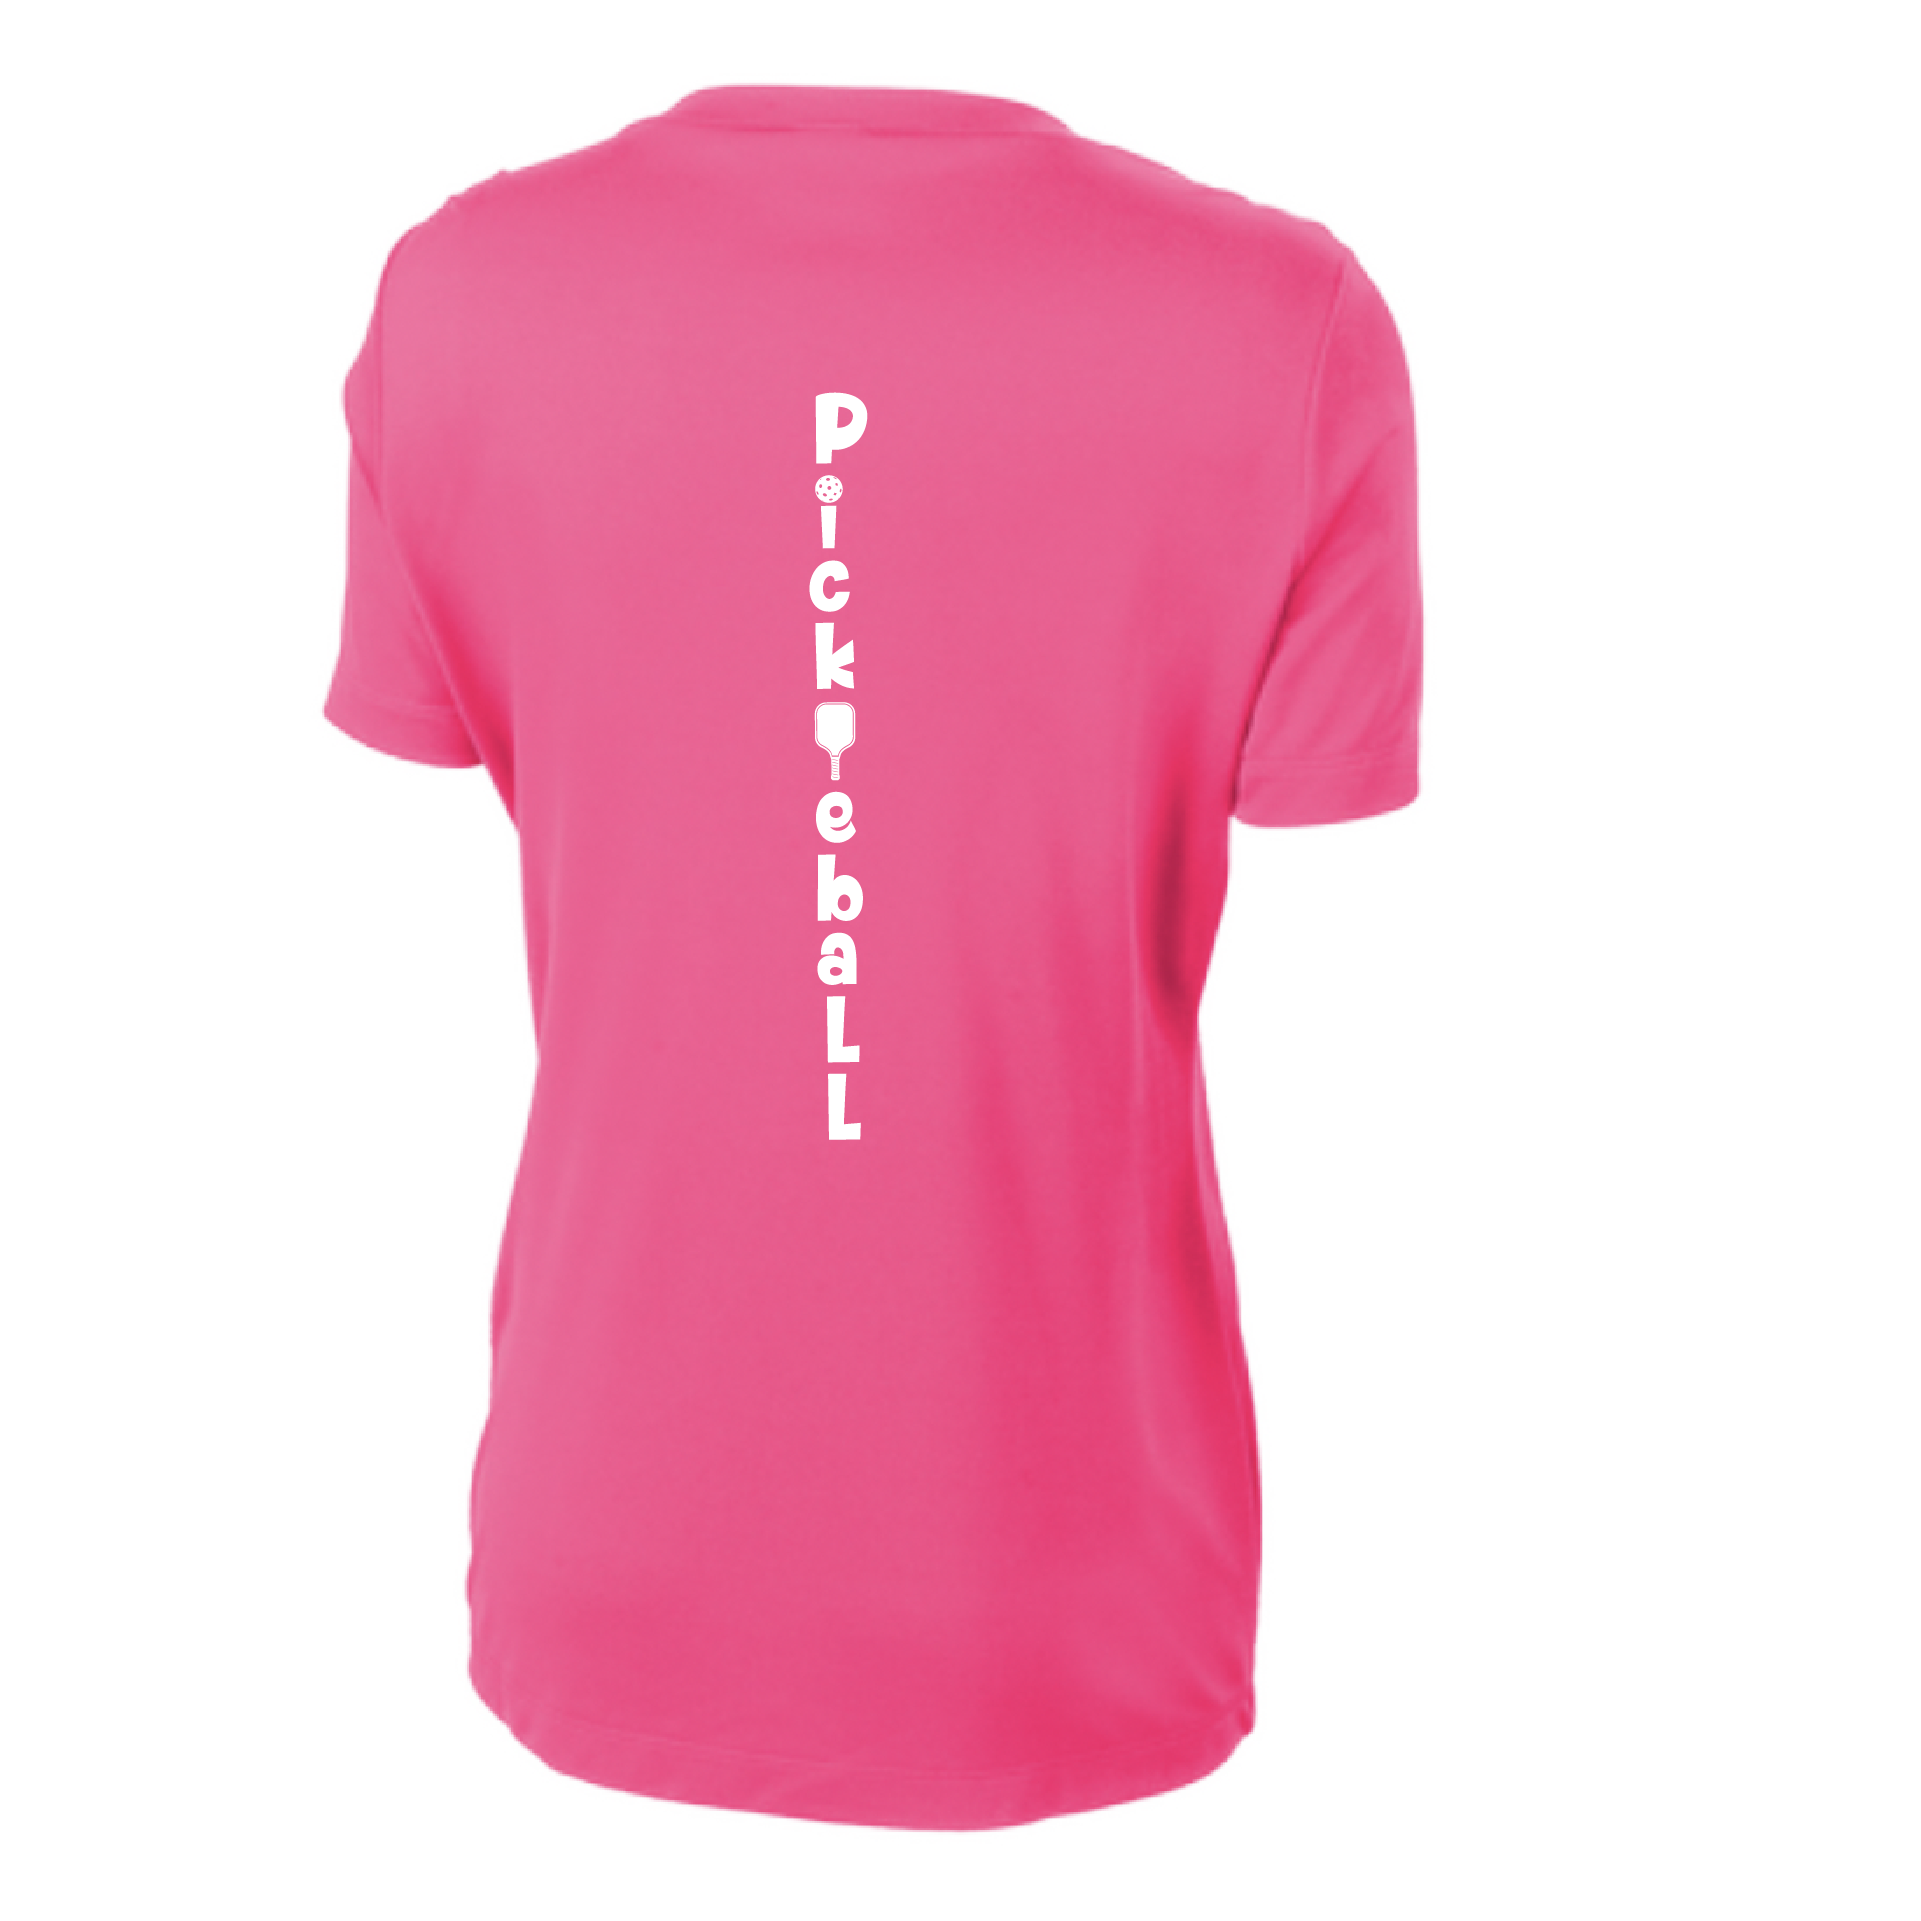 Pickleball Design: Pickleball Vertical Customizable Location  Women's Style: Short-Sleeve Crew-Neck  Shirt are lightweight, roomy and highly breathable. These moisture-wicking shirts are designed for athletic performance. They feature PosiCharge technology to lock in color and prevent logos from fading. Removable tag and set-in sleeves for comfort.